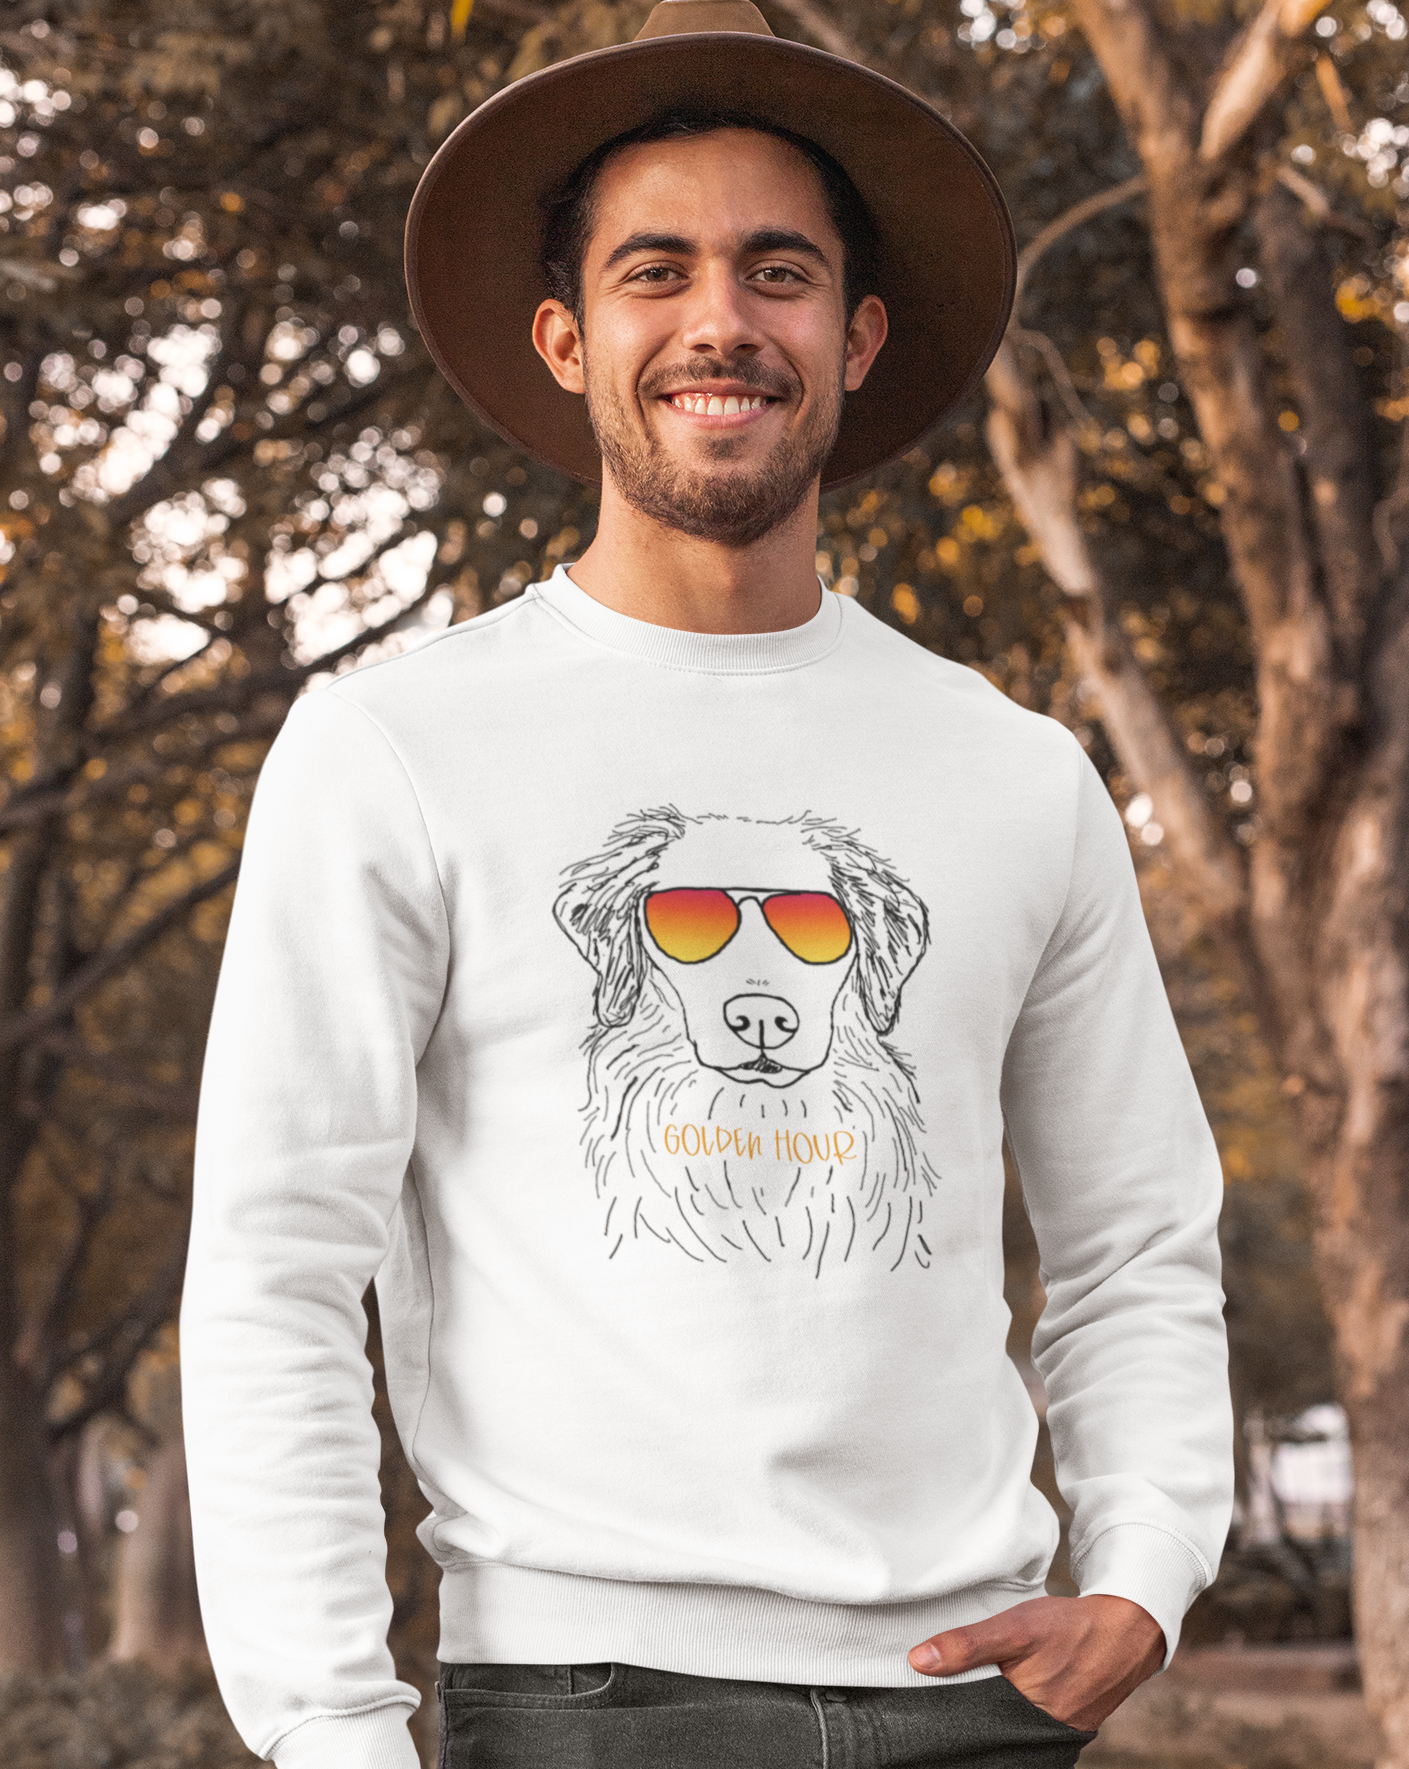 Happy Golden Hour! This cozy crewneck sweatshirt is perfect for staying warm while you are out trying to catch that golden lighting with your golden retriever! Perfect gift for that golden lover in your life.